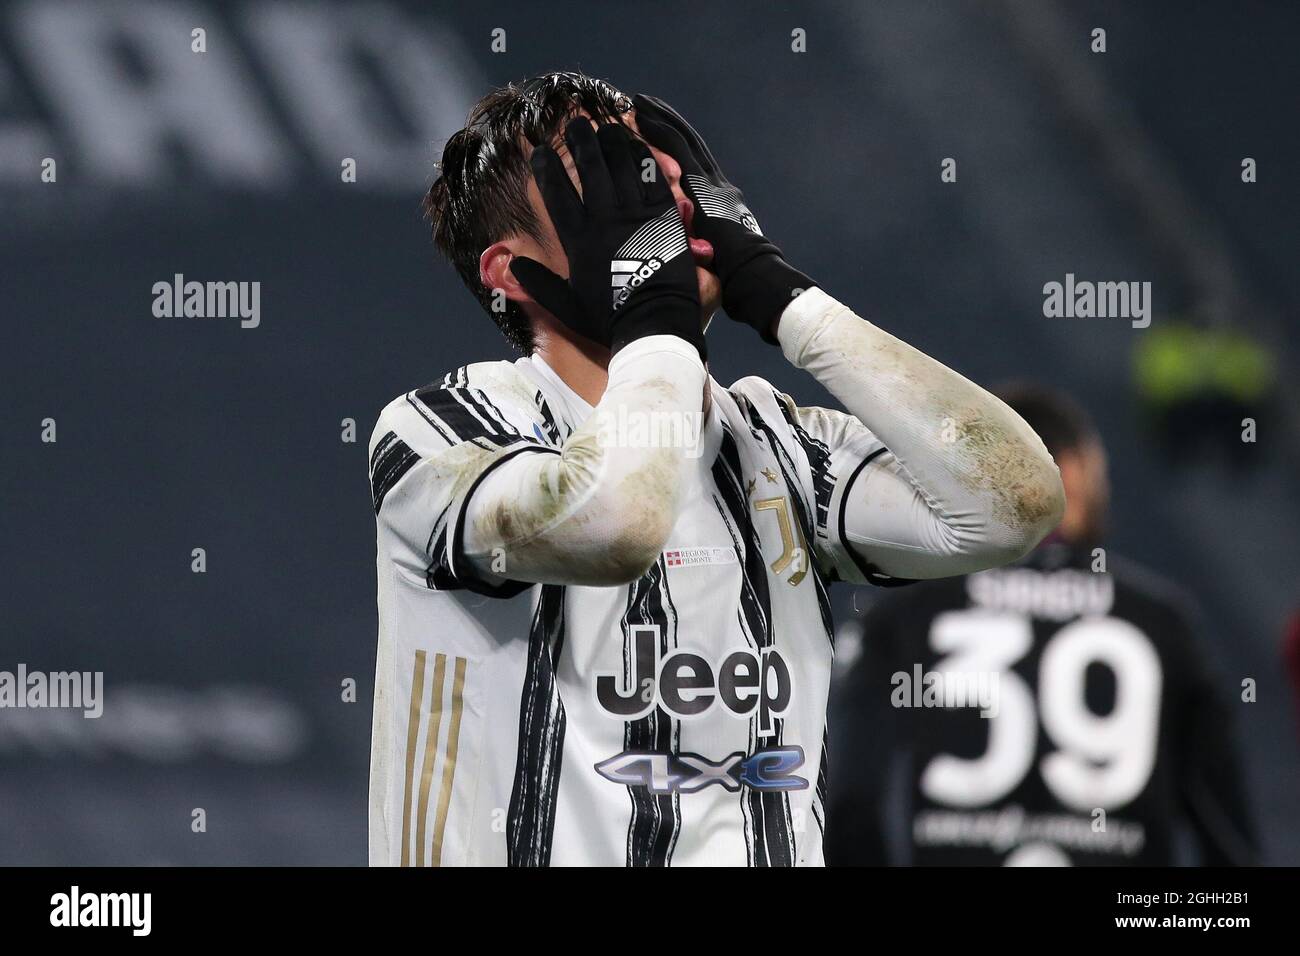 Paulo Dybala of Juventus reacts after having a shot well saved by Salvatore Sirigu of Torino FC during the Serie A match at Allianz Stadium, Turin. Picture date: 5th December 2020. Picture credit should read: Jonathan Moscrop/Sportimage via PA Images Stock Photo